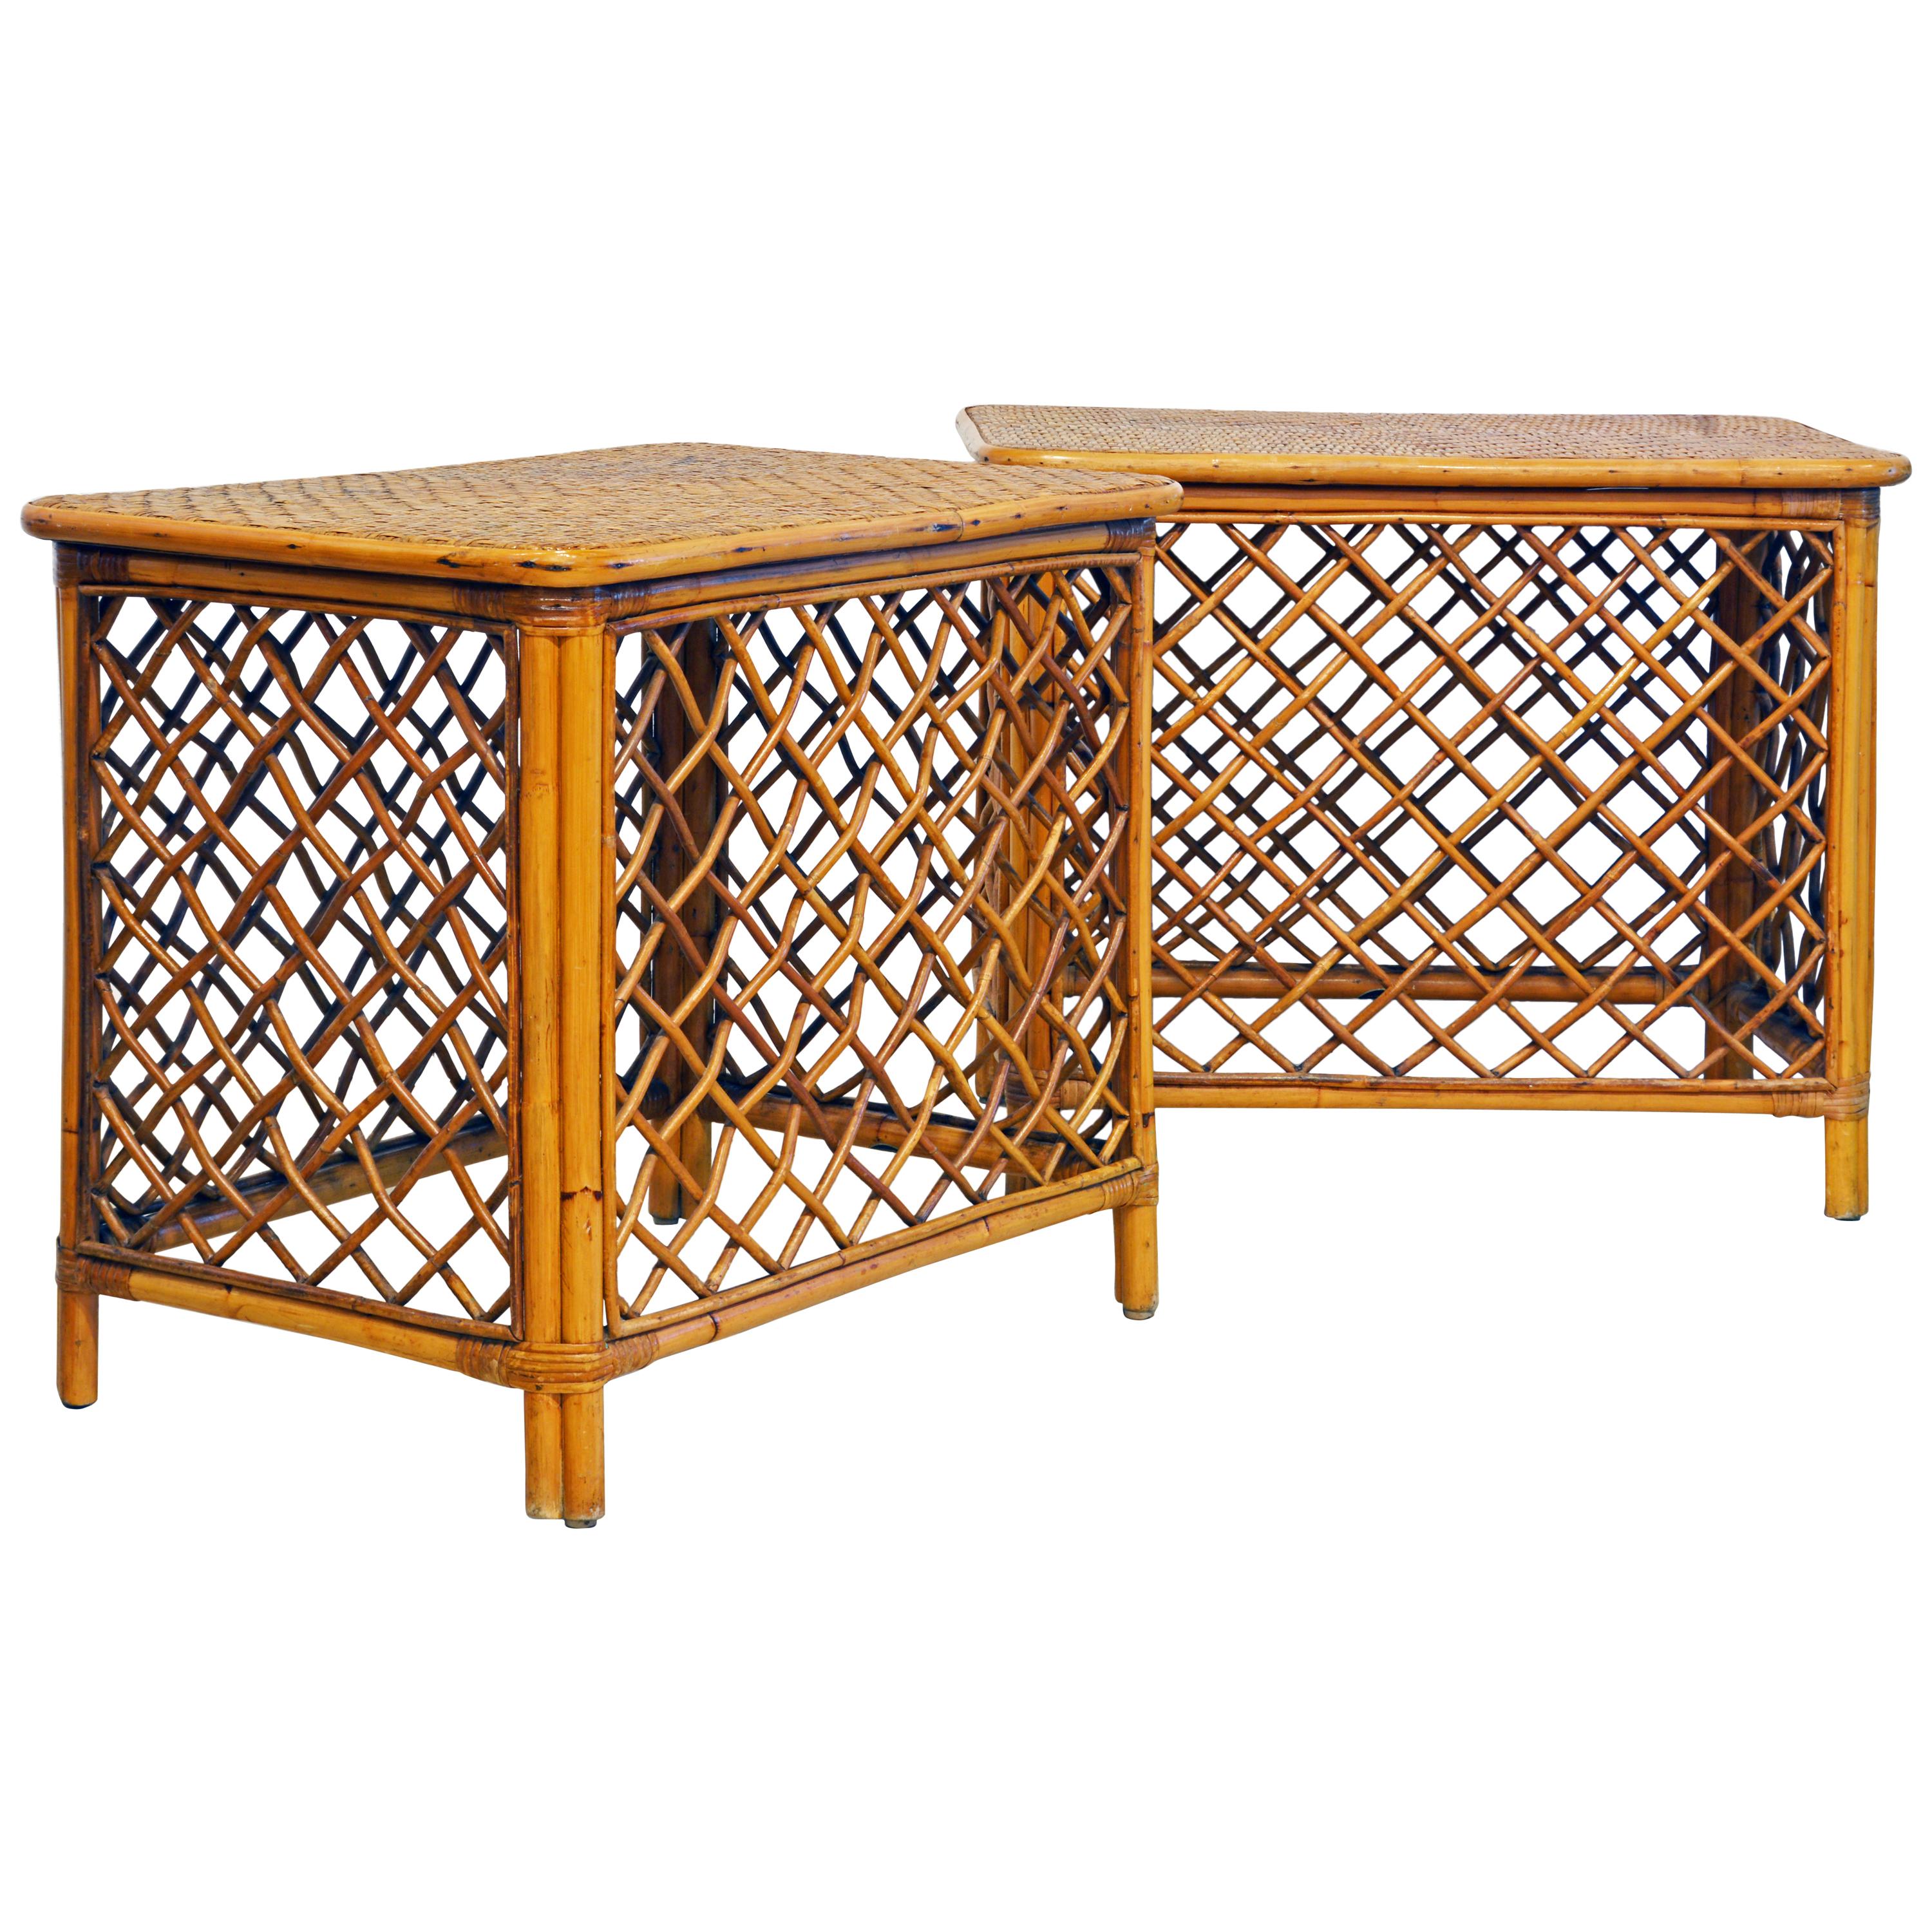 Pair of Plantation Style Rattan Side Tables by Artesania, Dominican Republic